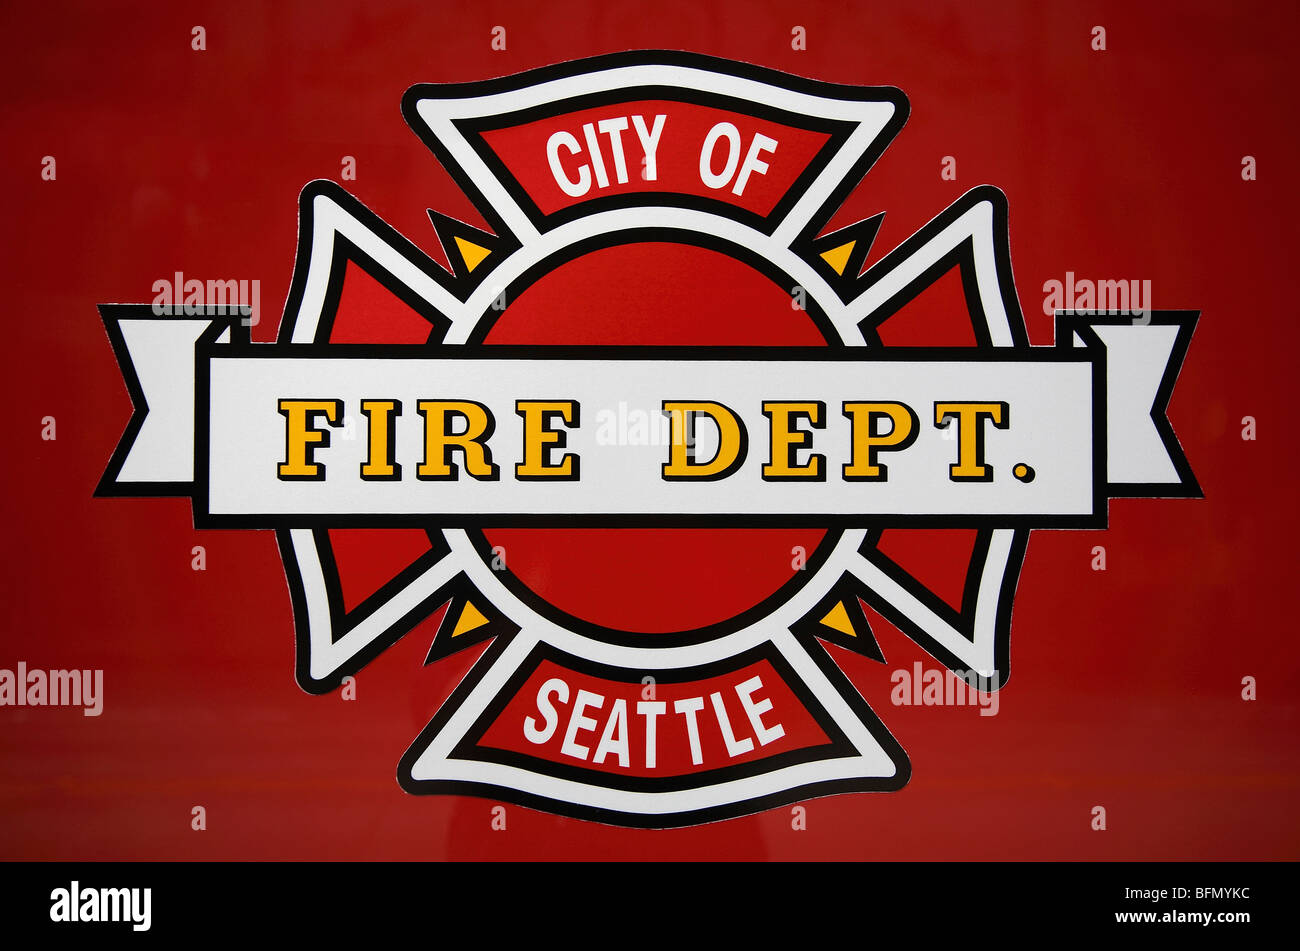 United States of America, Washington, Seattle, emblem of the City of Seattle Fire Department. Stock Photo